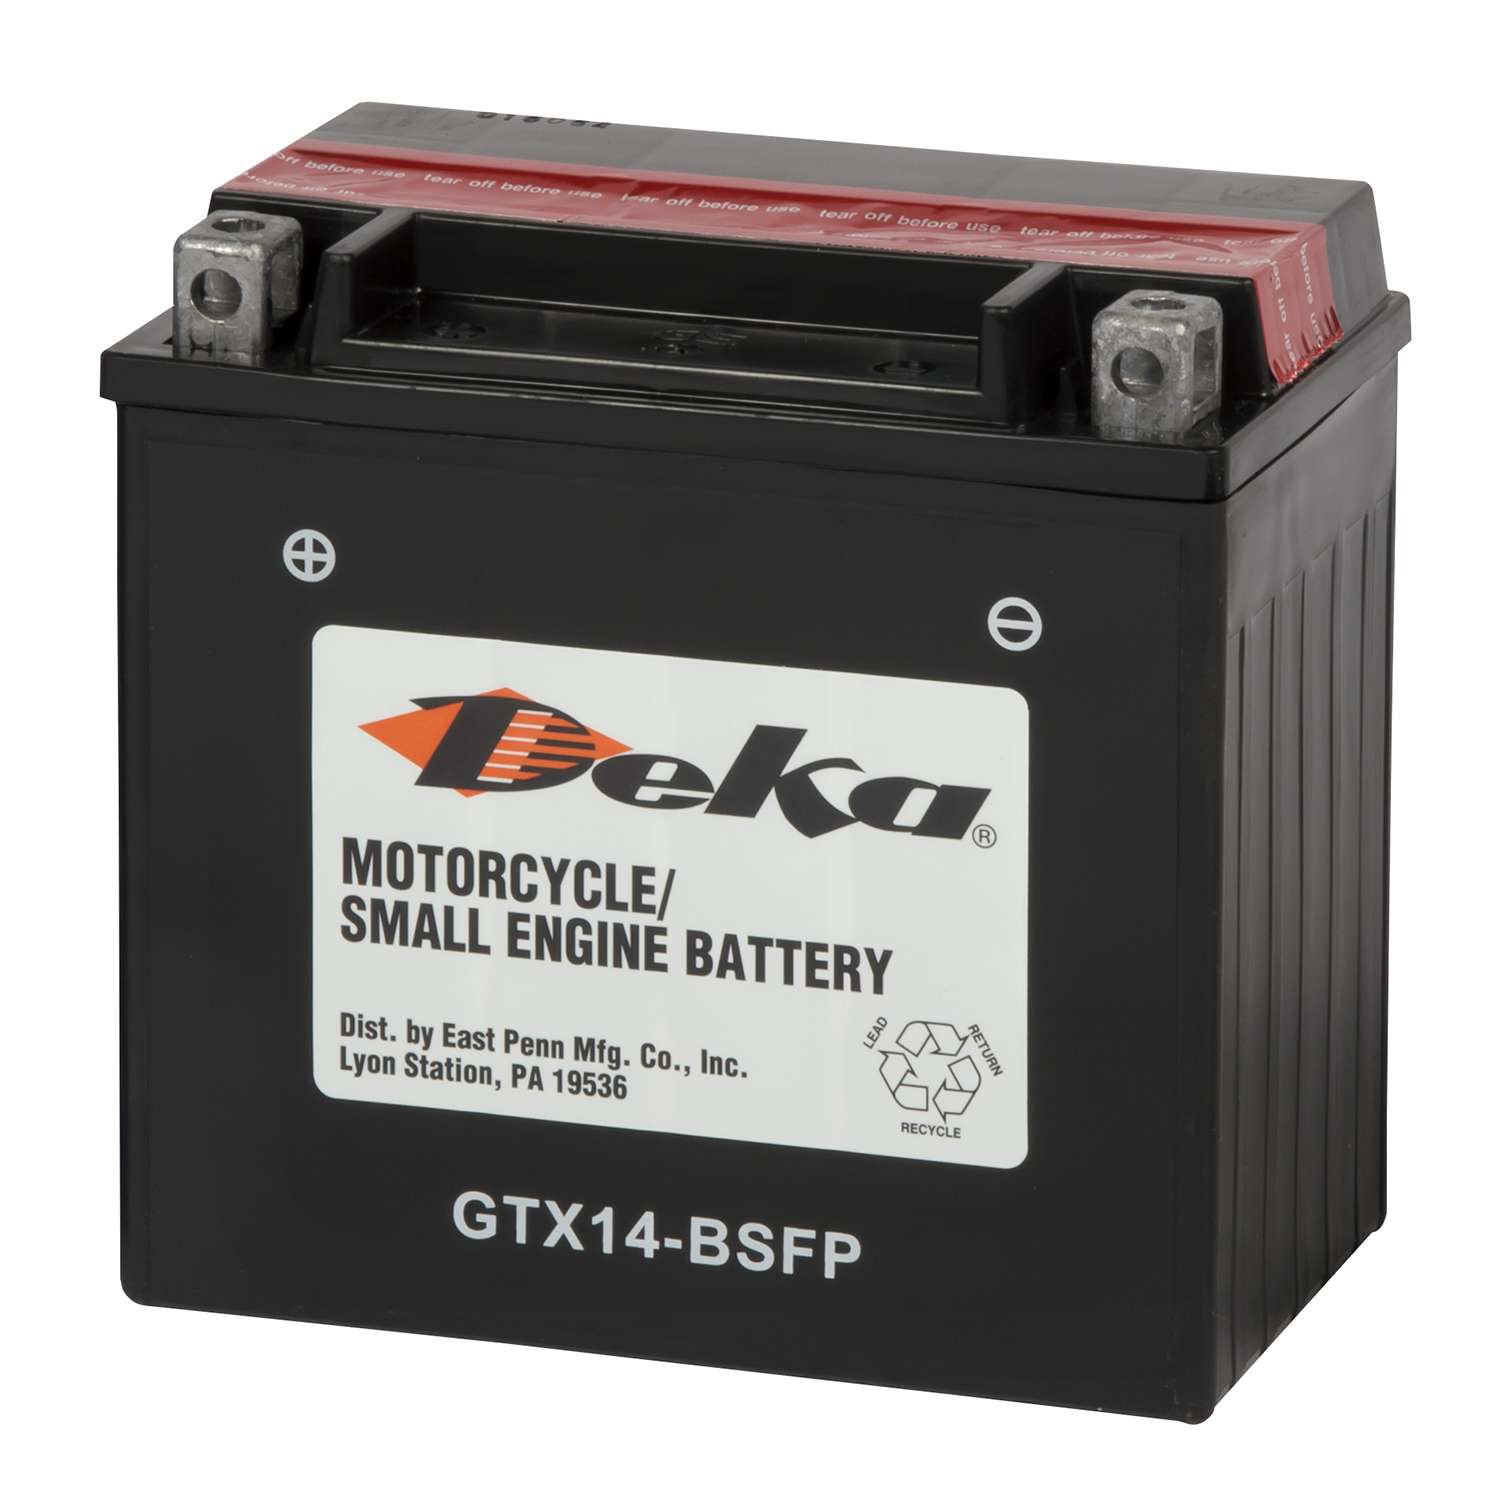 Deka Motorcycle Battery Application Guide - Motorcycle for Life